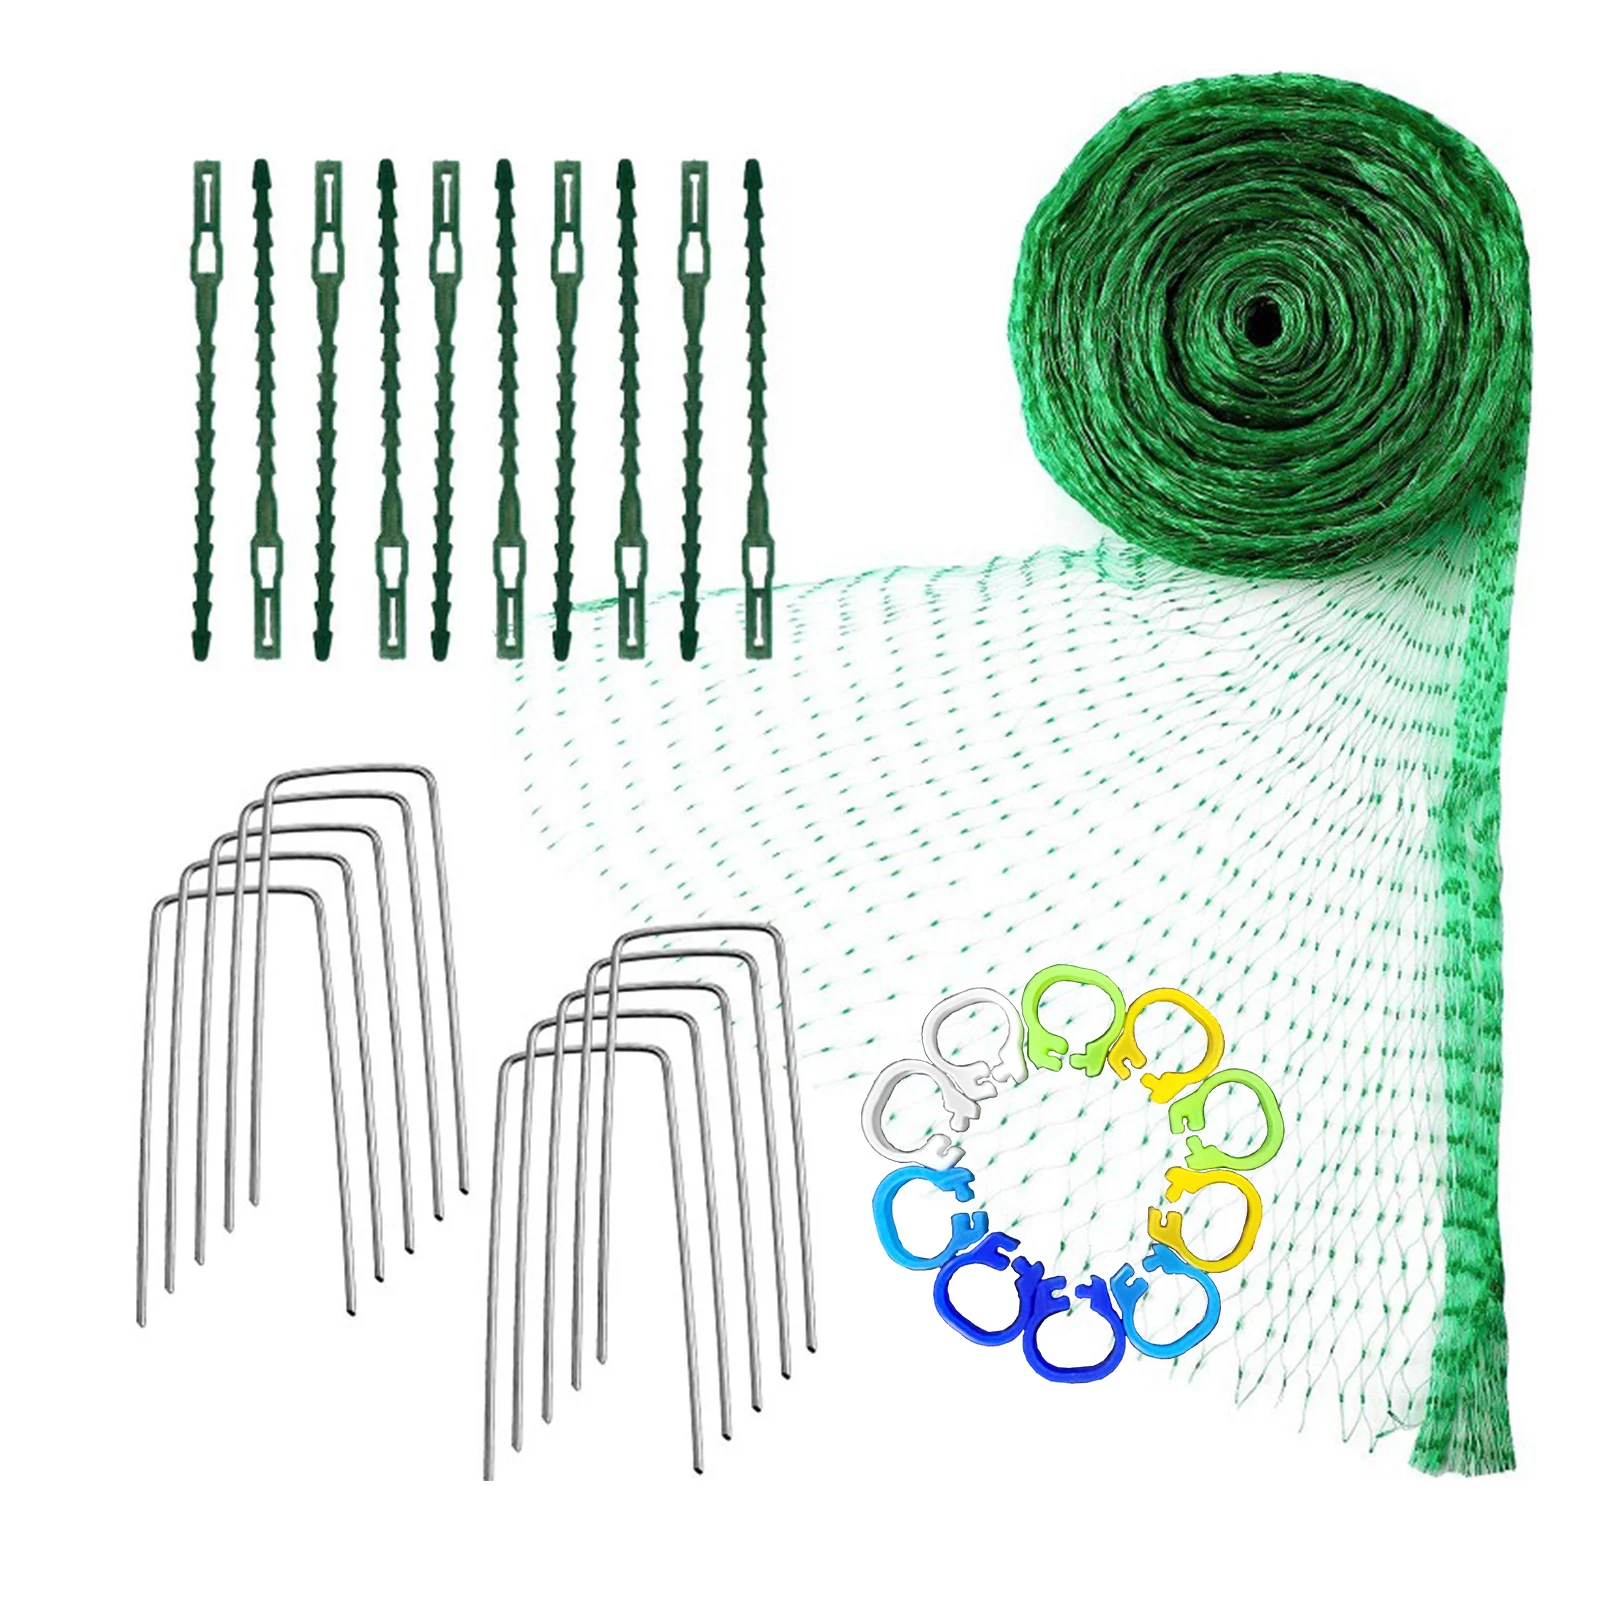 

Garden Plant Netting Mesh Reusable Anti Bird Pests Protect Tree Net Covers For Fruits Vegetables Flowers Fencing Greenhouse New